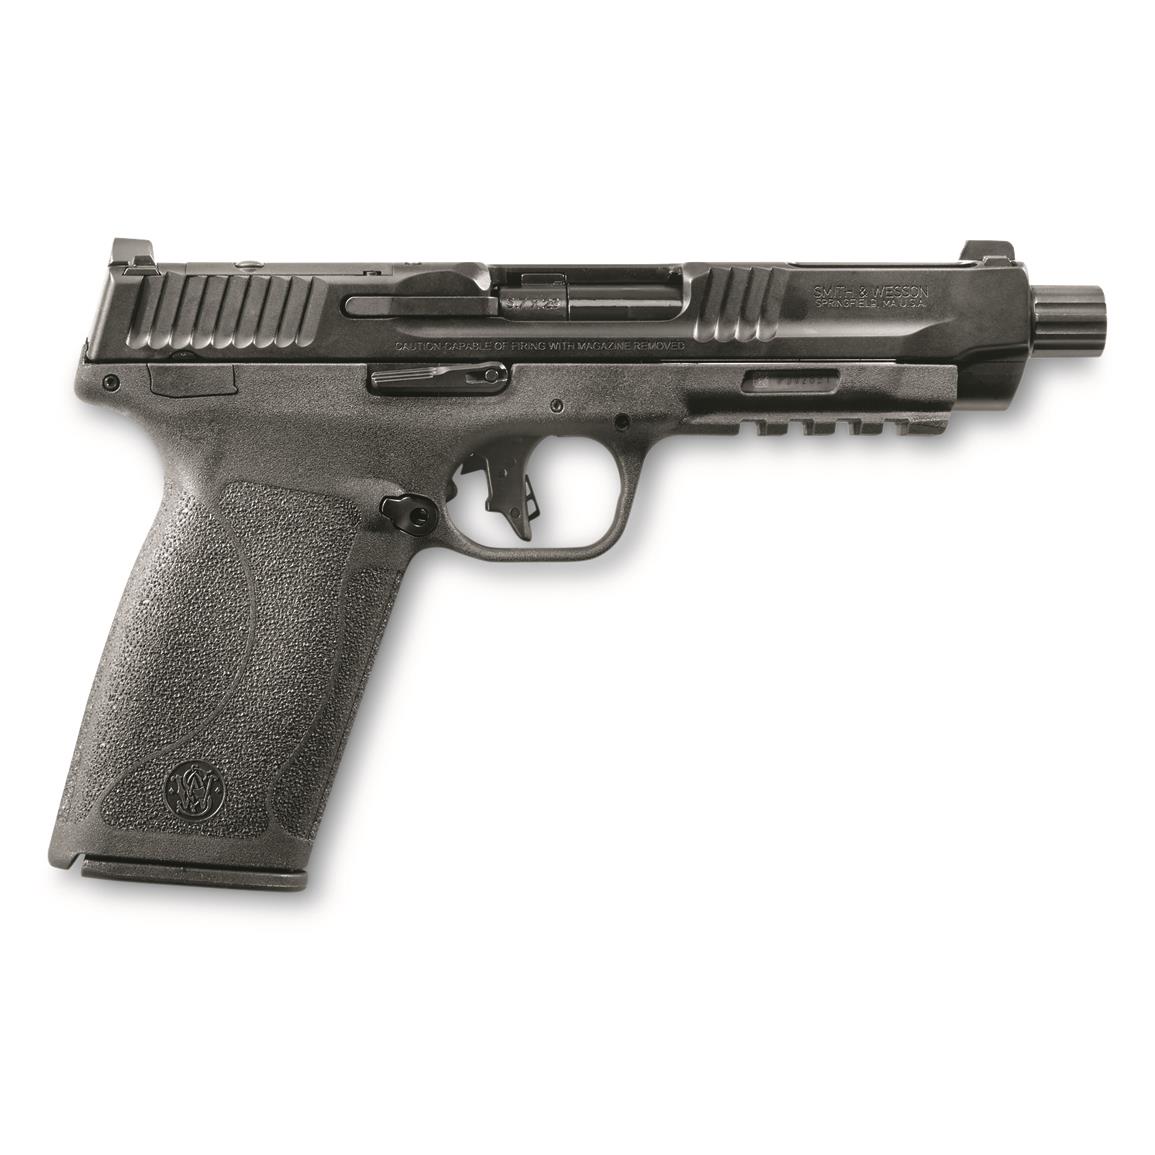 Smith & Wesson M&P 5.7, Semi-automatic, 5.7x28mm, 5" Barrel, No Thumb Safety, 22+1 Rounds